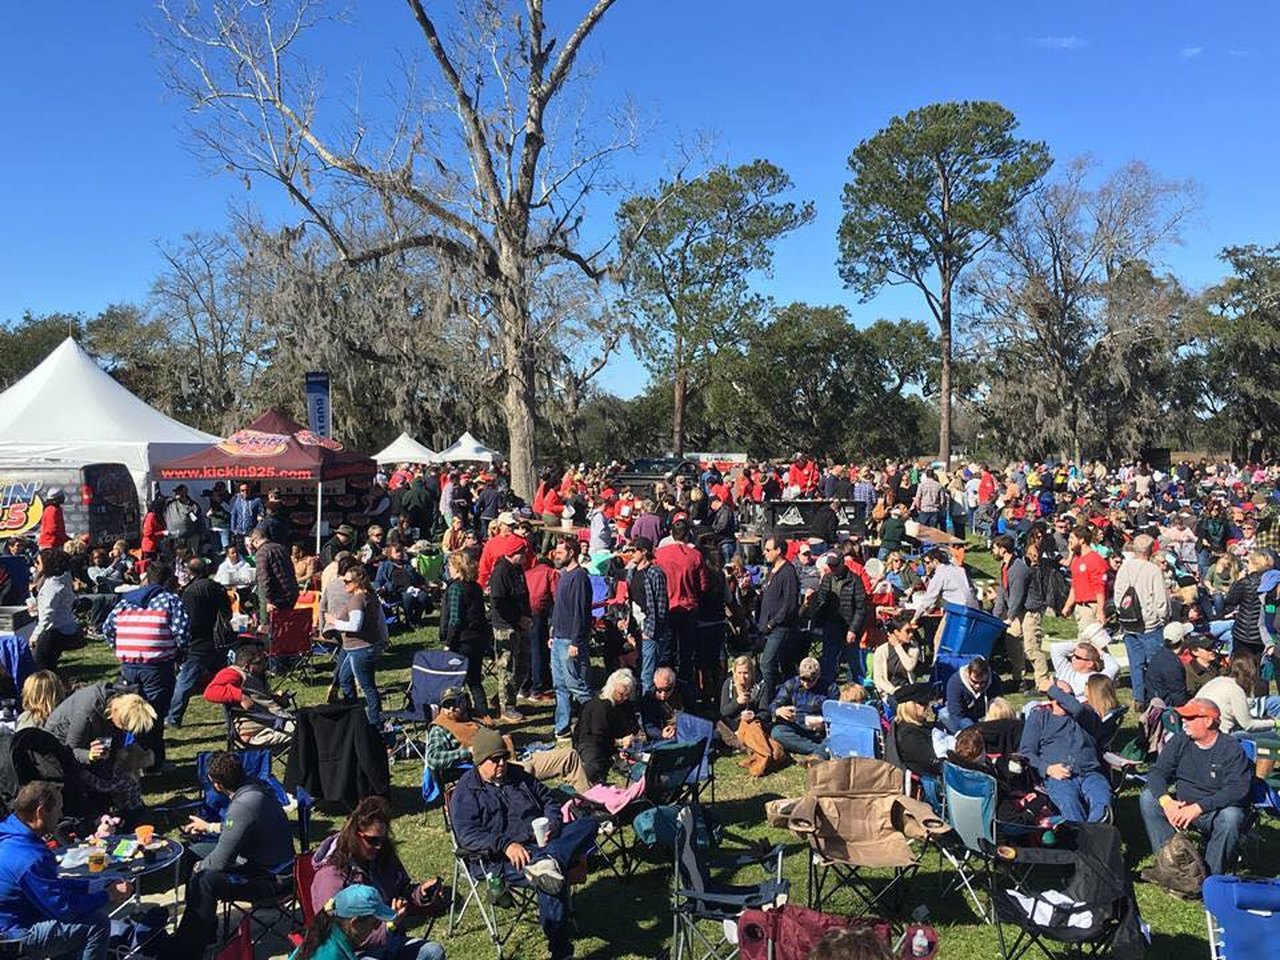 This Oyster Fest In South Carolina Is The World's Largest Oyster Festival